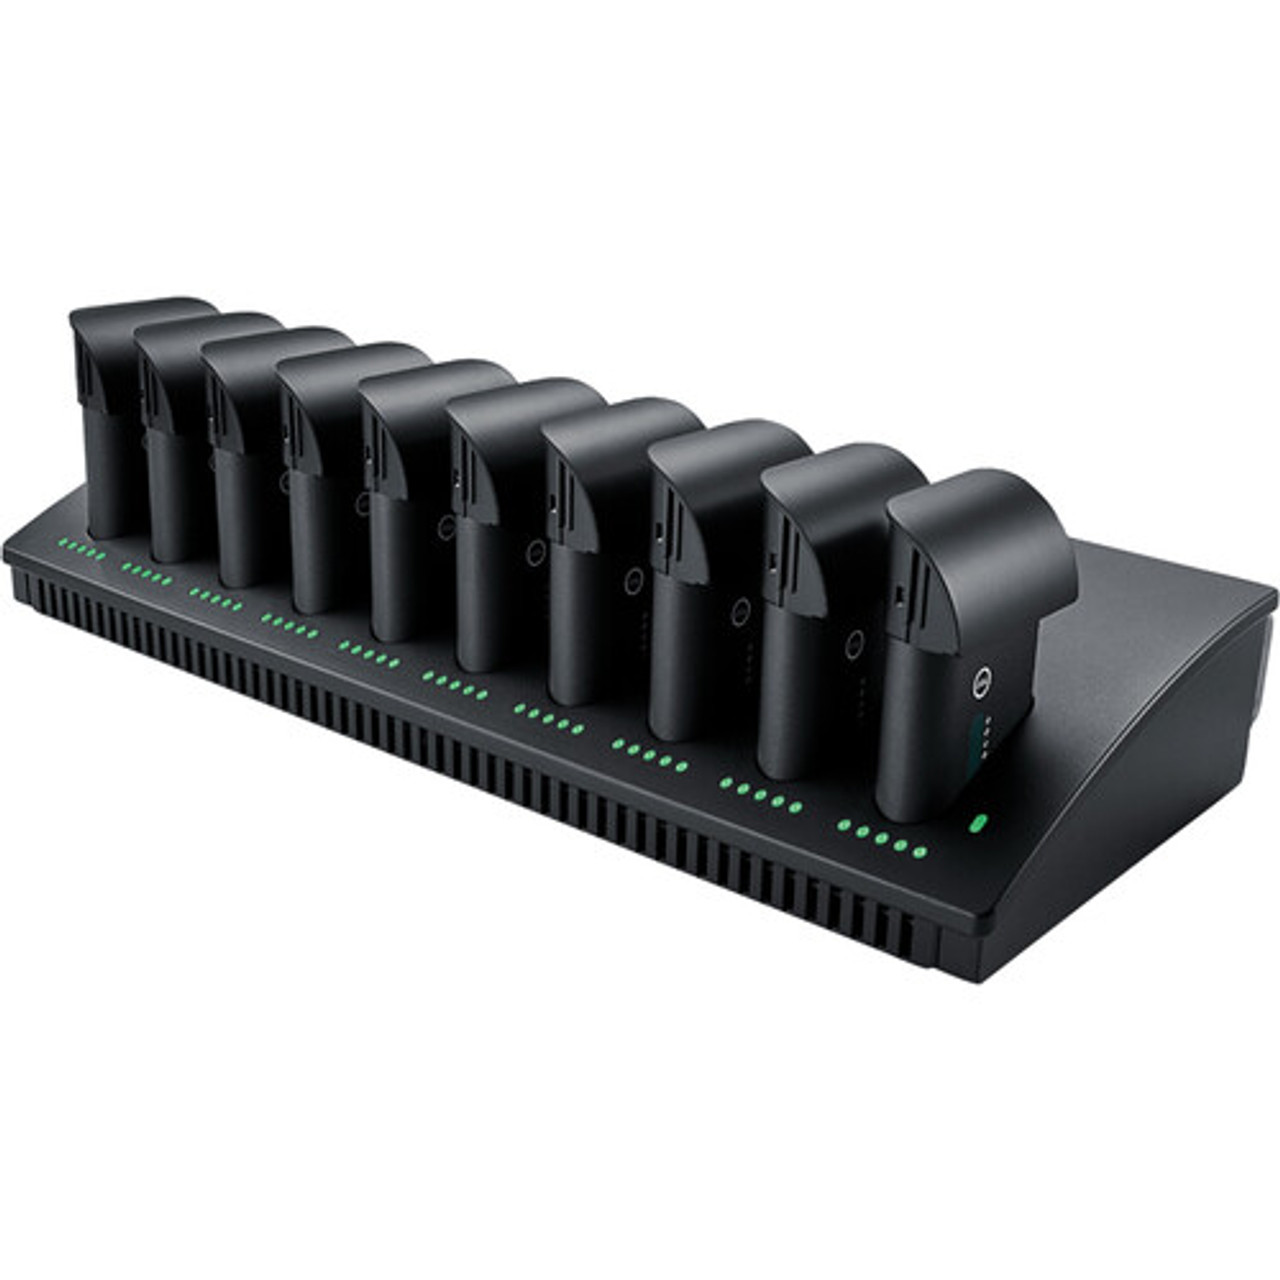 Shure MXCWNCS-AR 10-Bay Networked Charging Station for SB930 Batteries (MXCWNCS-AR)